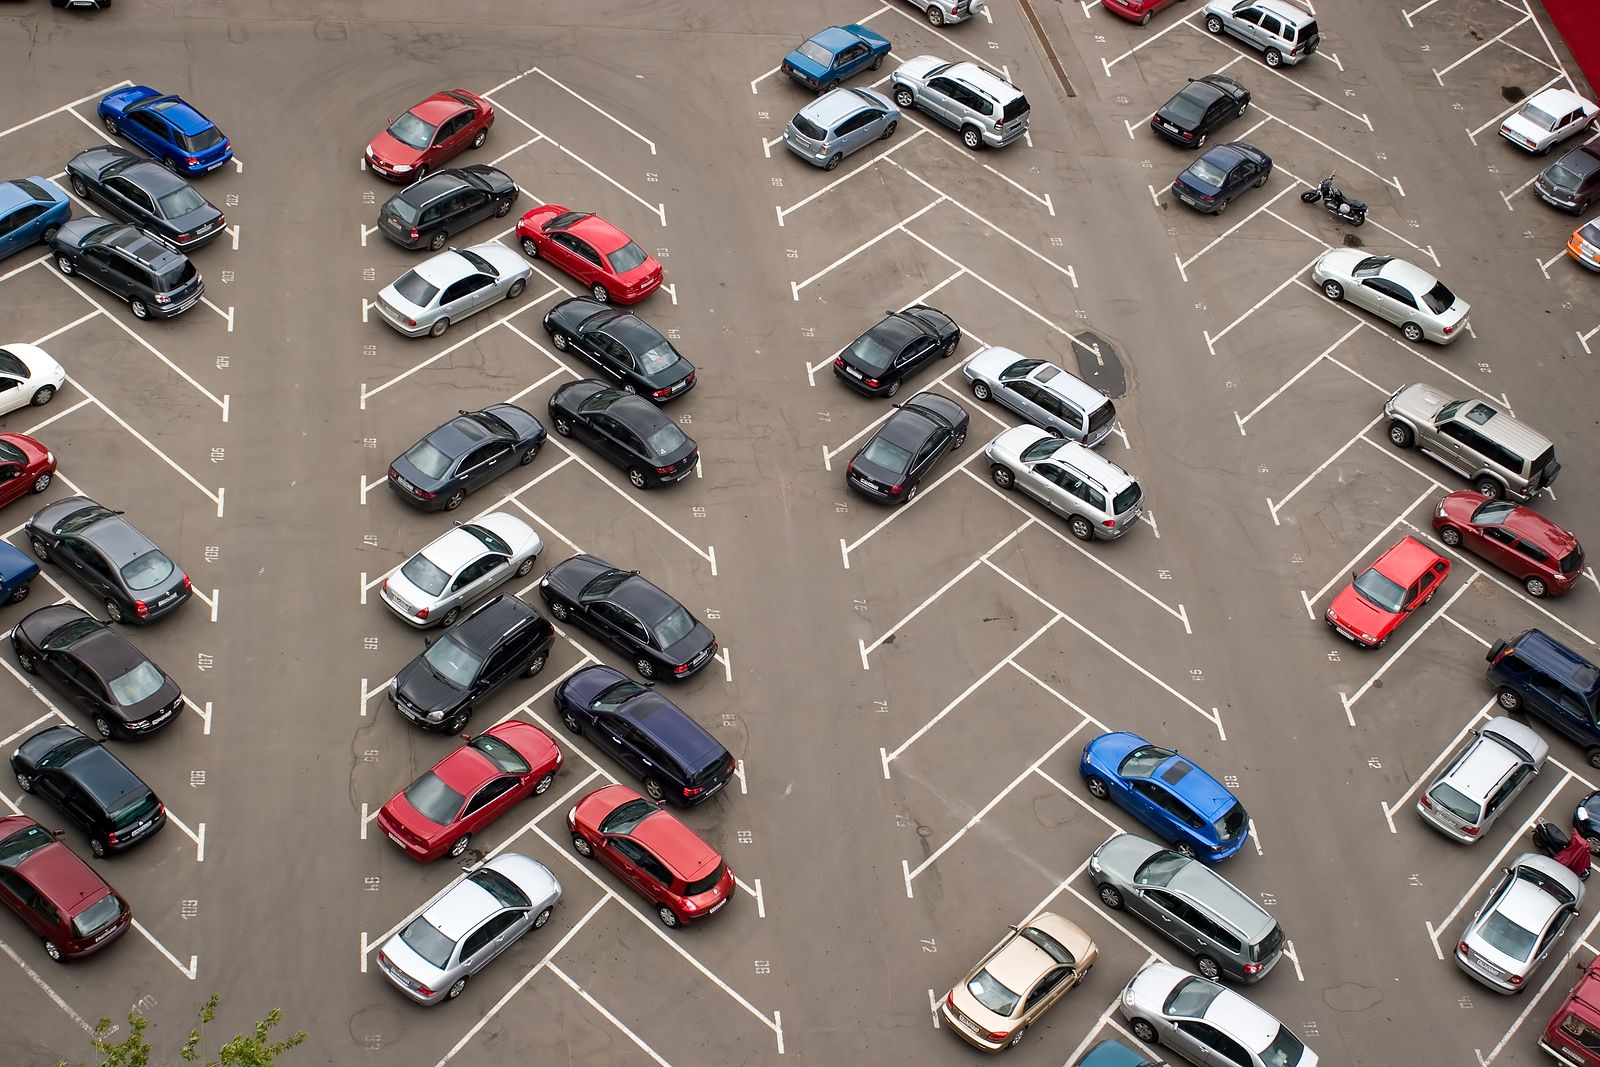 Standard Parking Space Segment Issues And How To Direct Them?